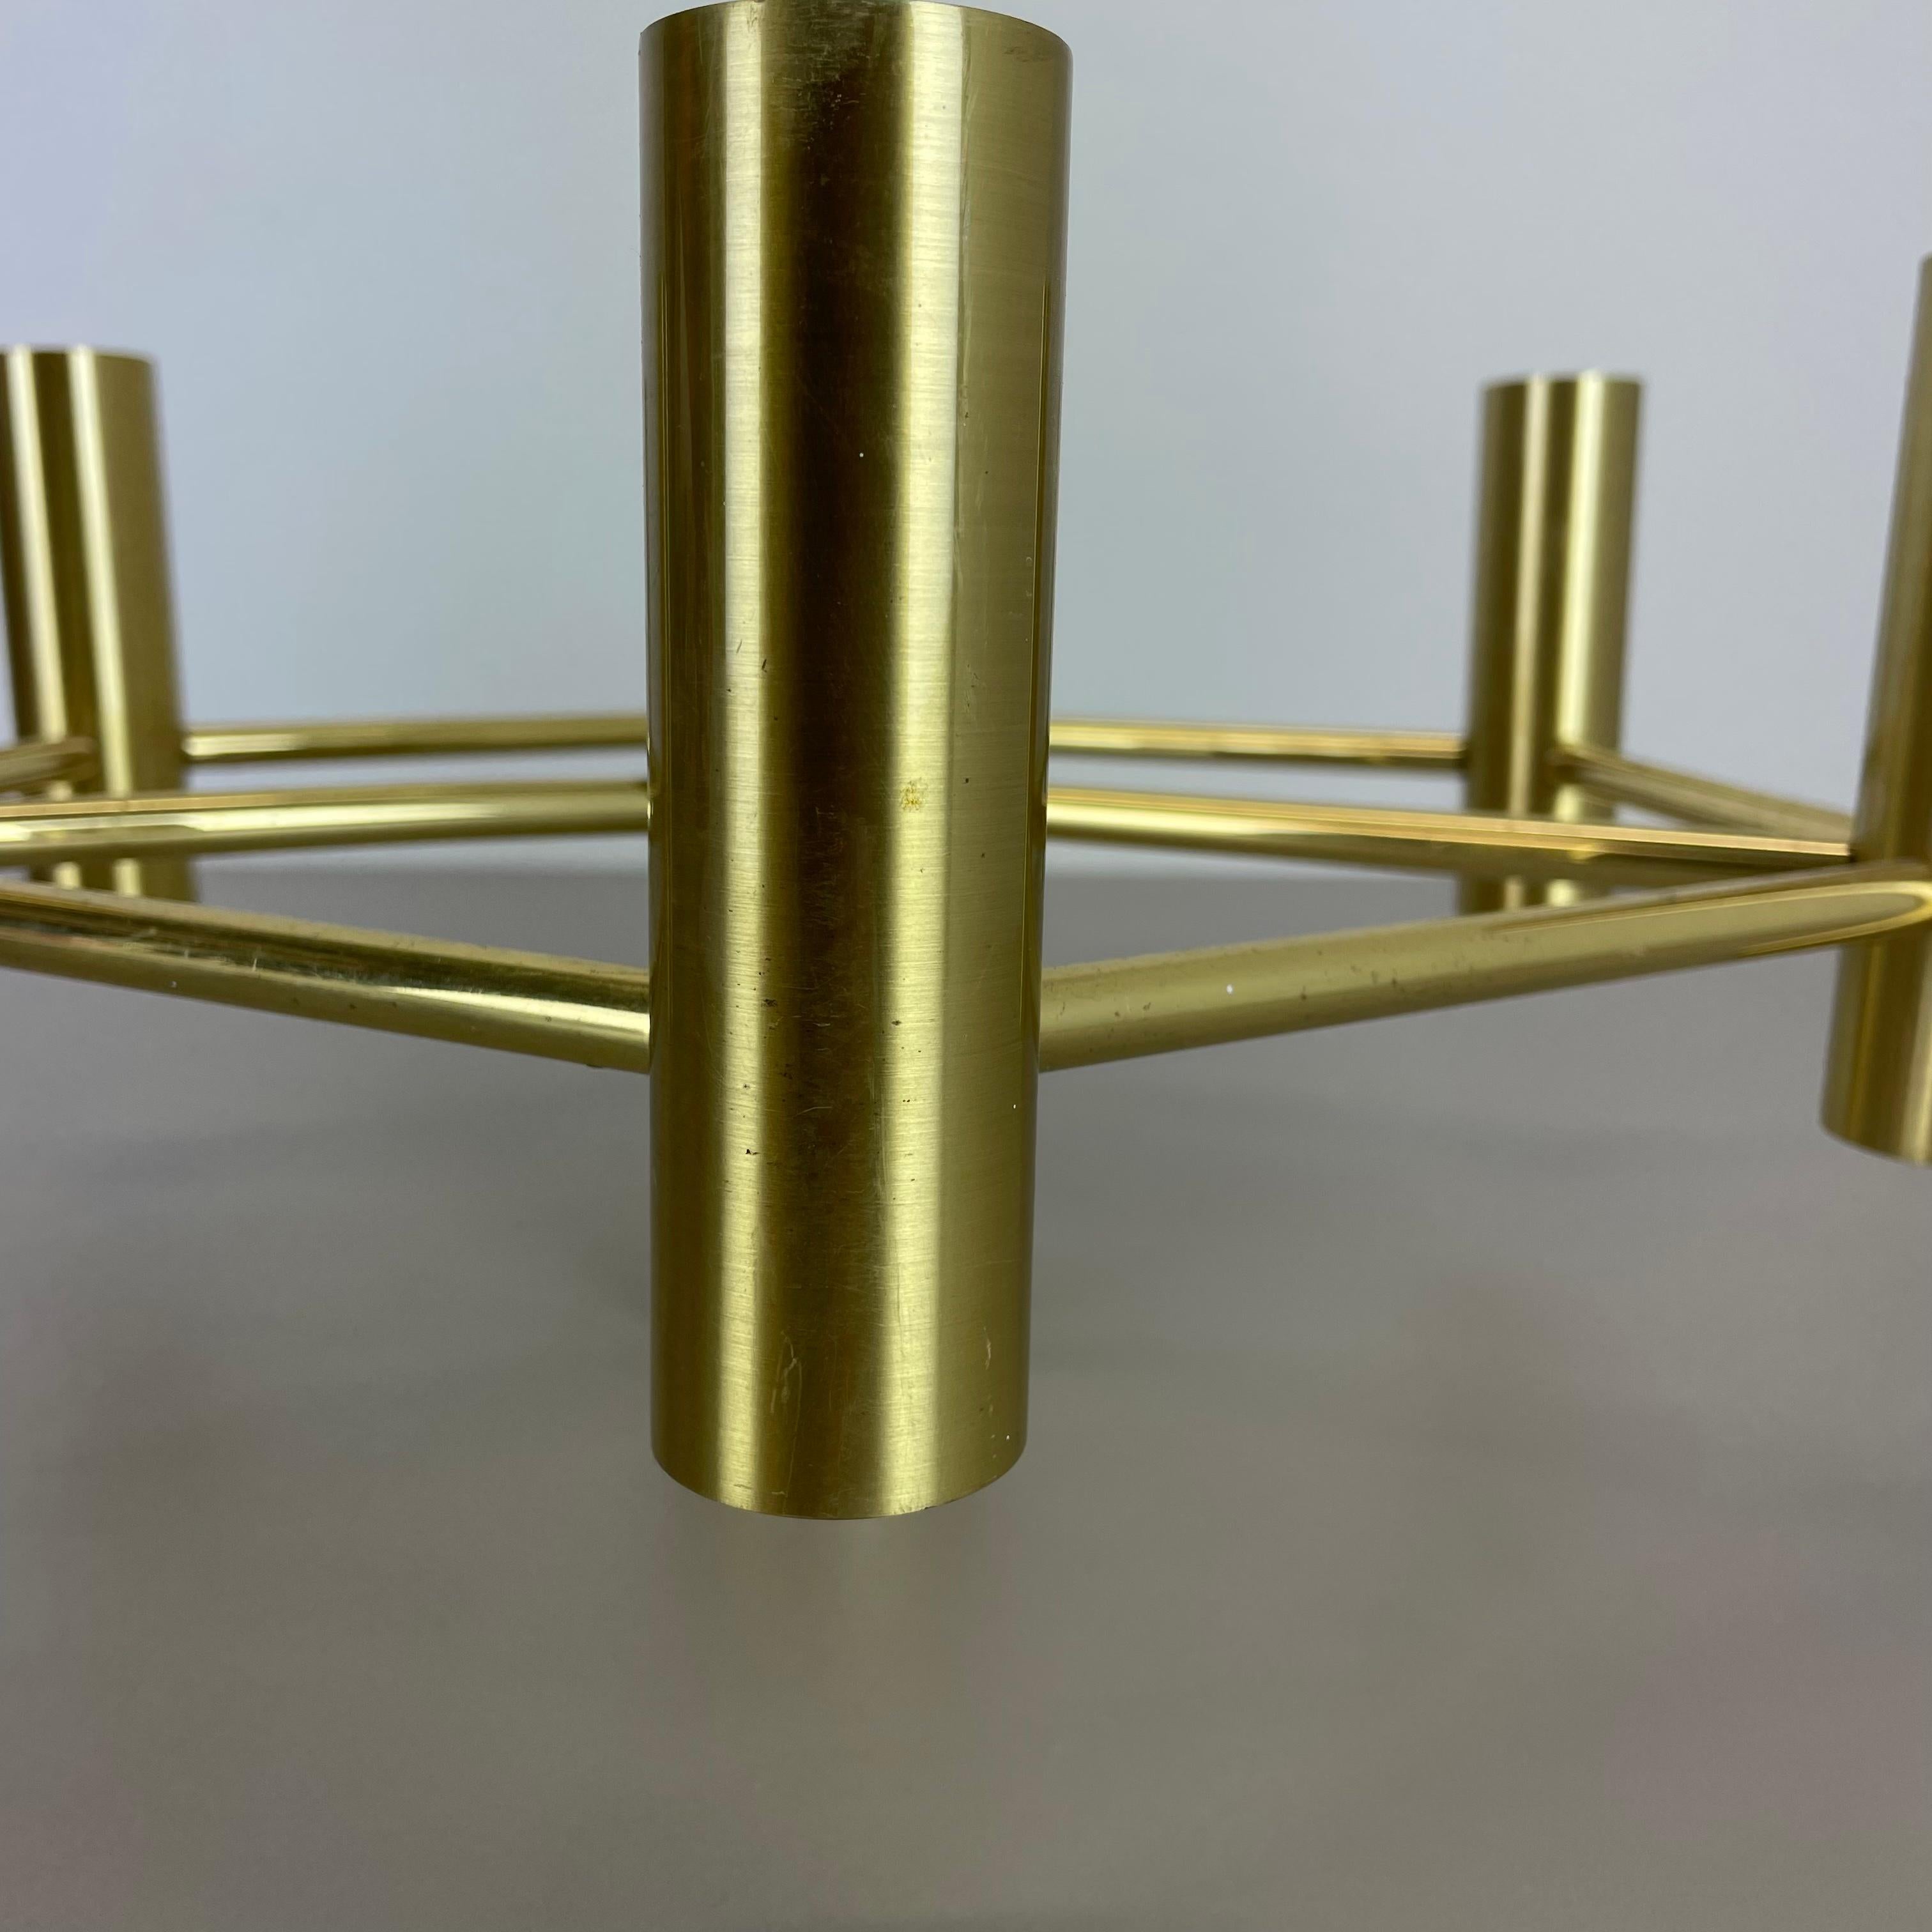 Brass Italian Stilnovo Style Atomic Space Age Ceiling Light Sconces, Italy, 1970 For Sale 5